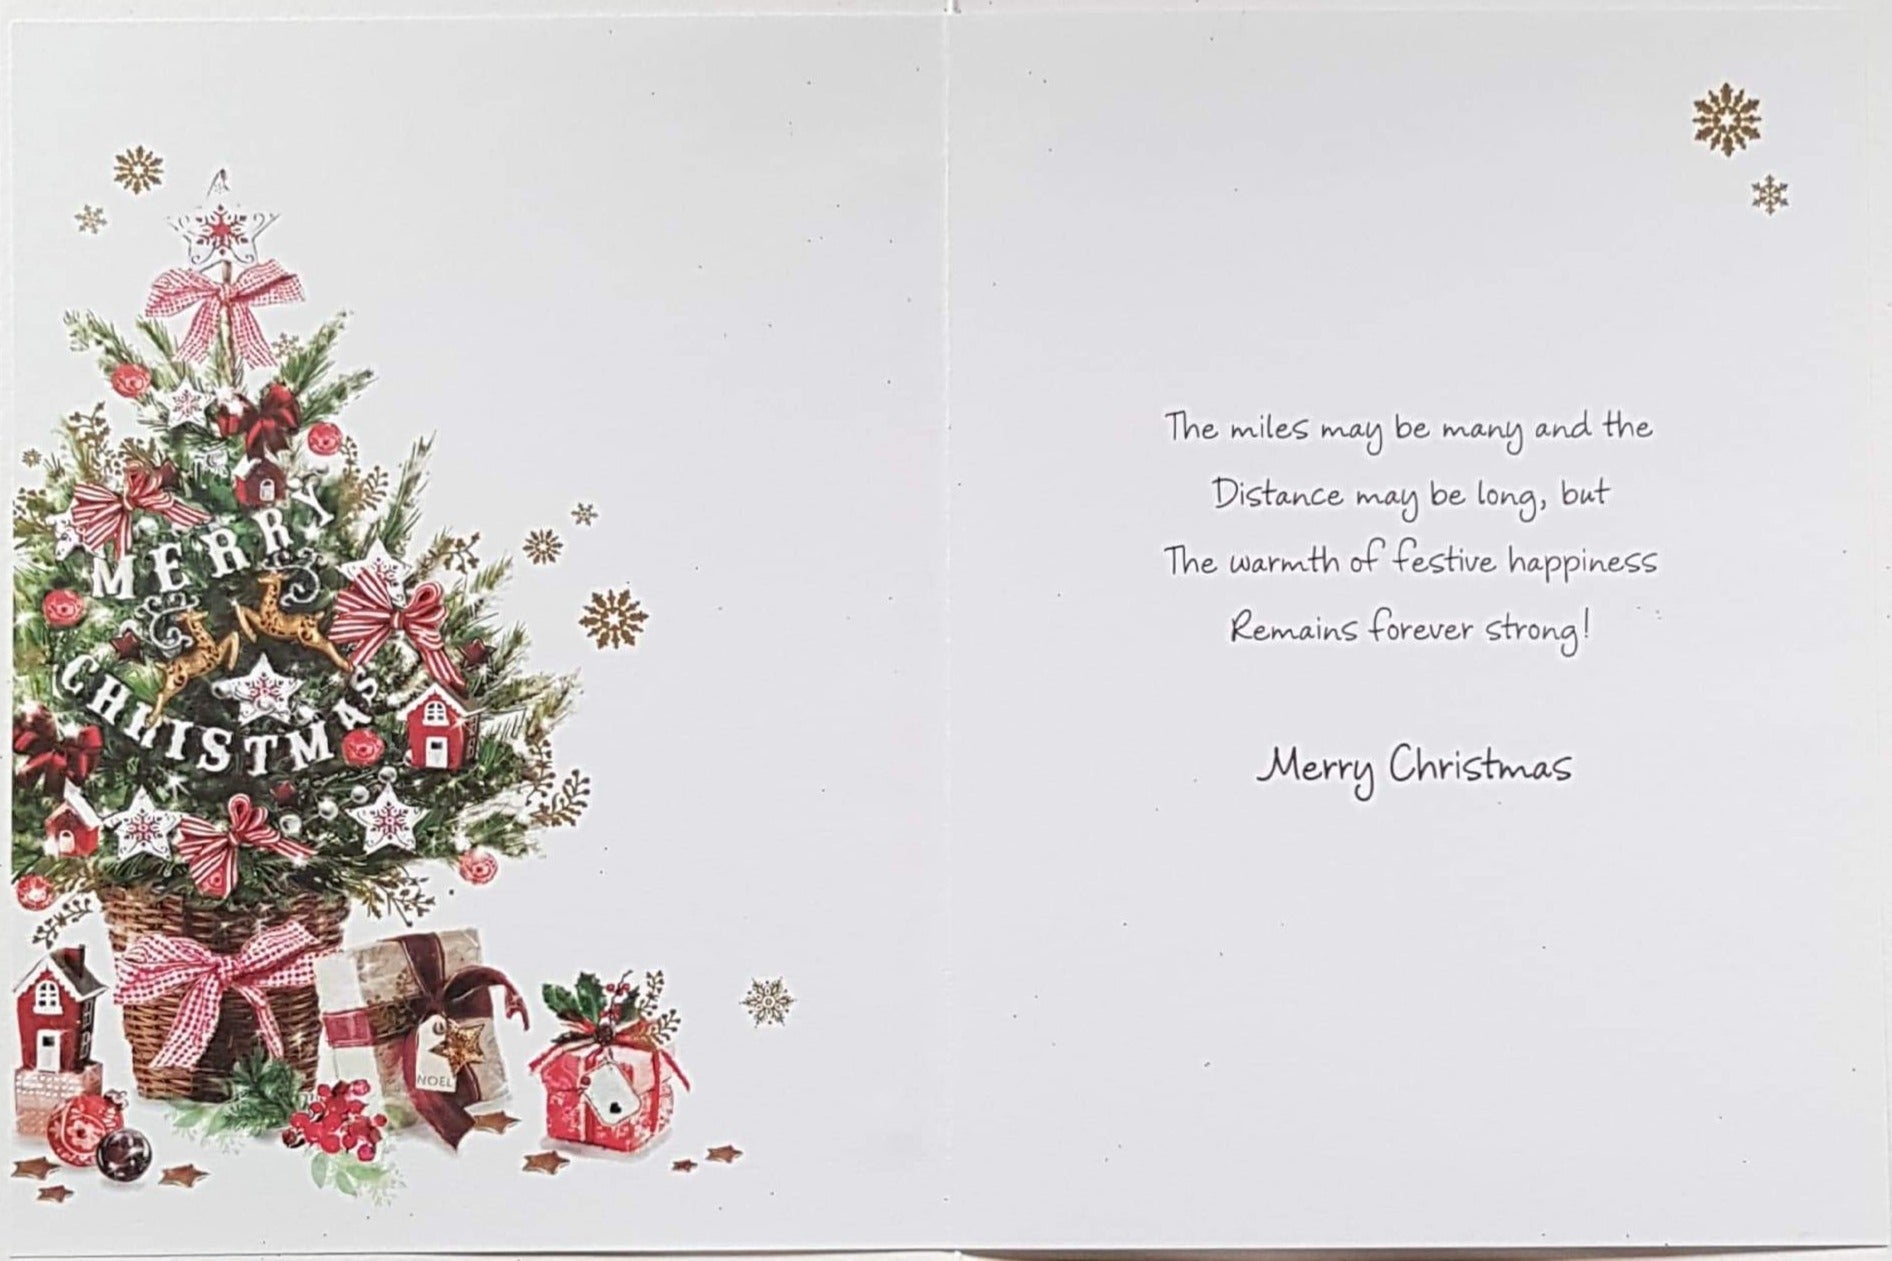 Across The Miles Christmas Card - With Festive Cheer & Decorated Tree & Gifts Beneath